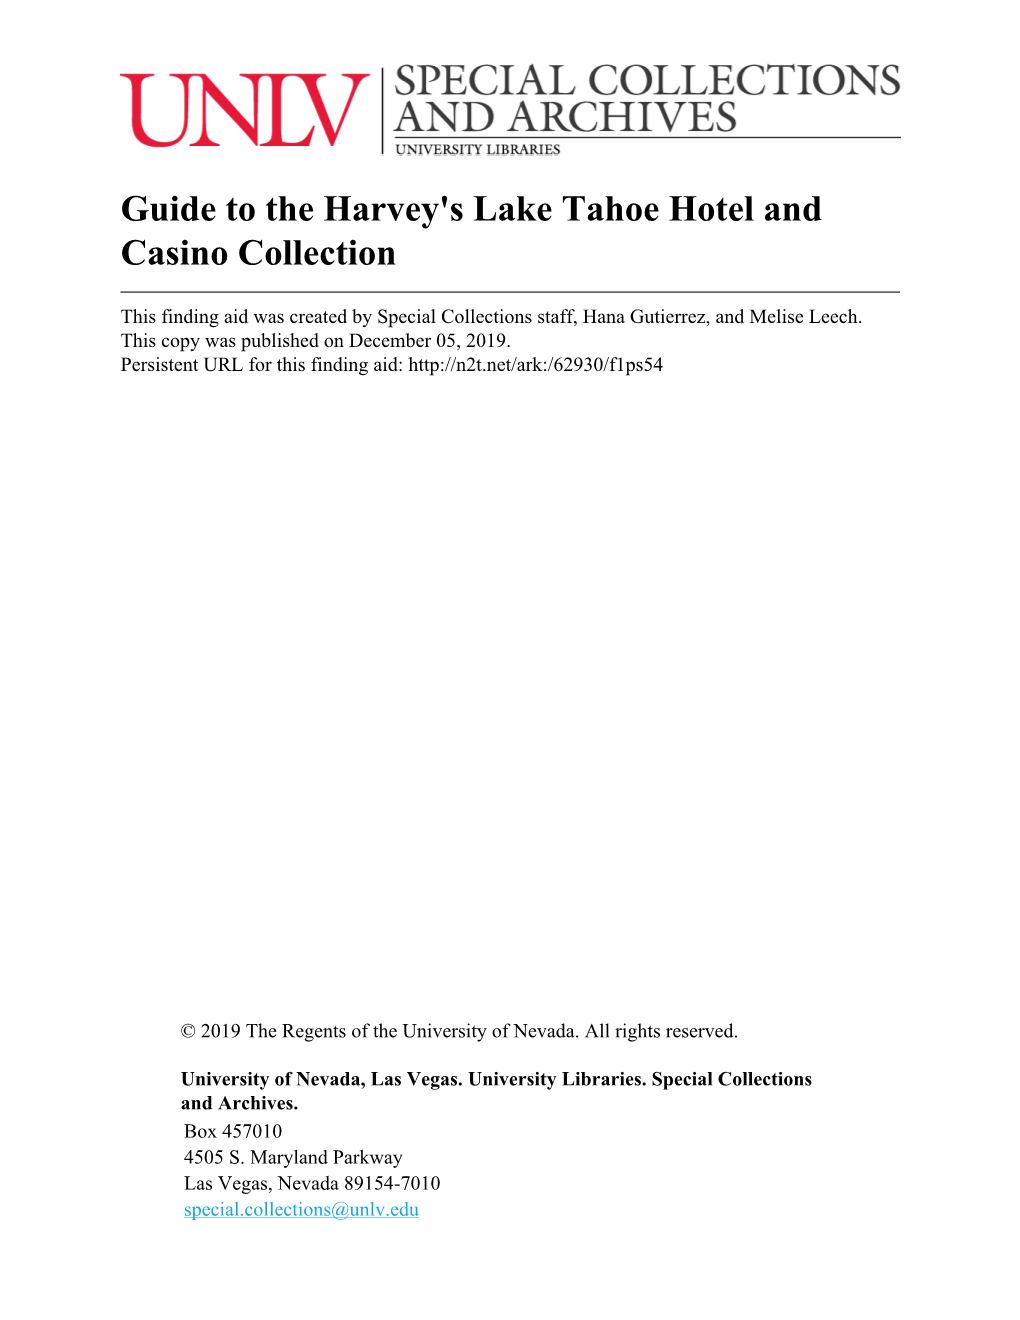 Guide to the Harvey's Lake Tahoe Hotel and Casino Collection